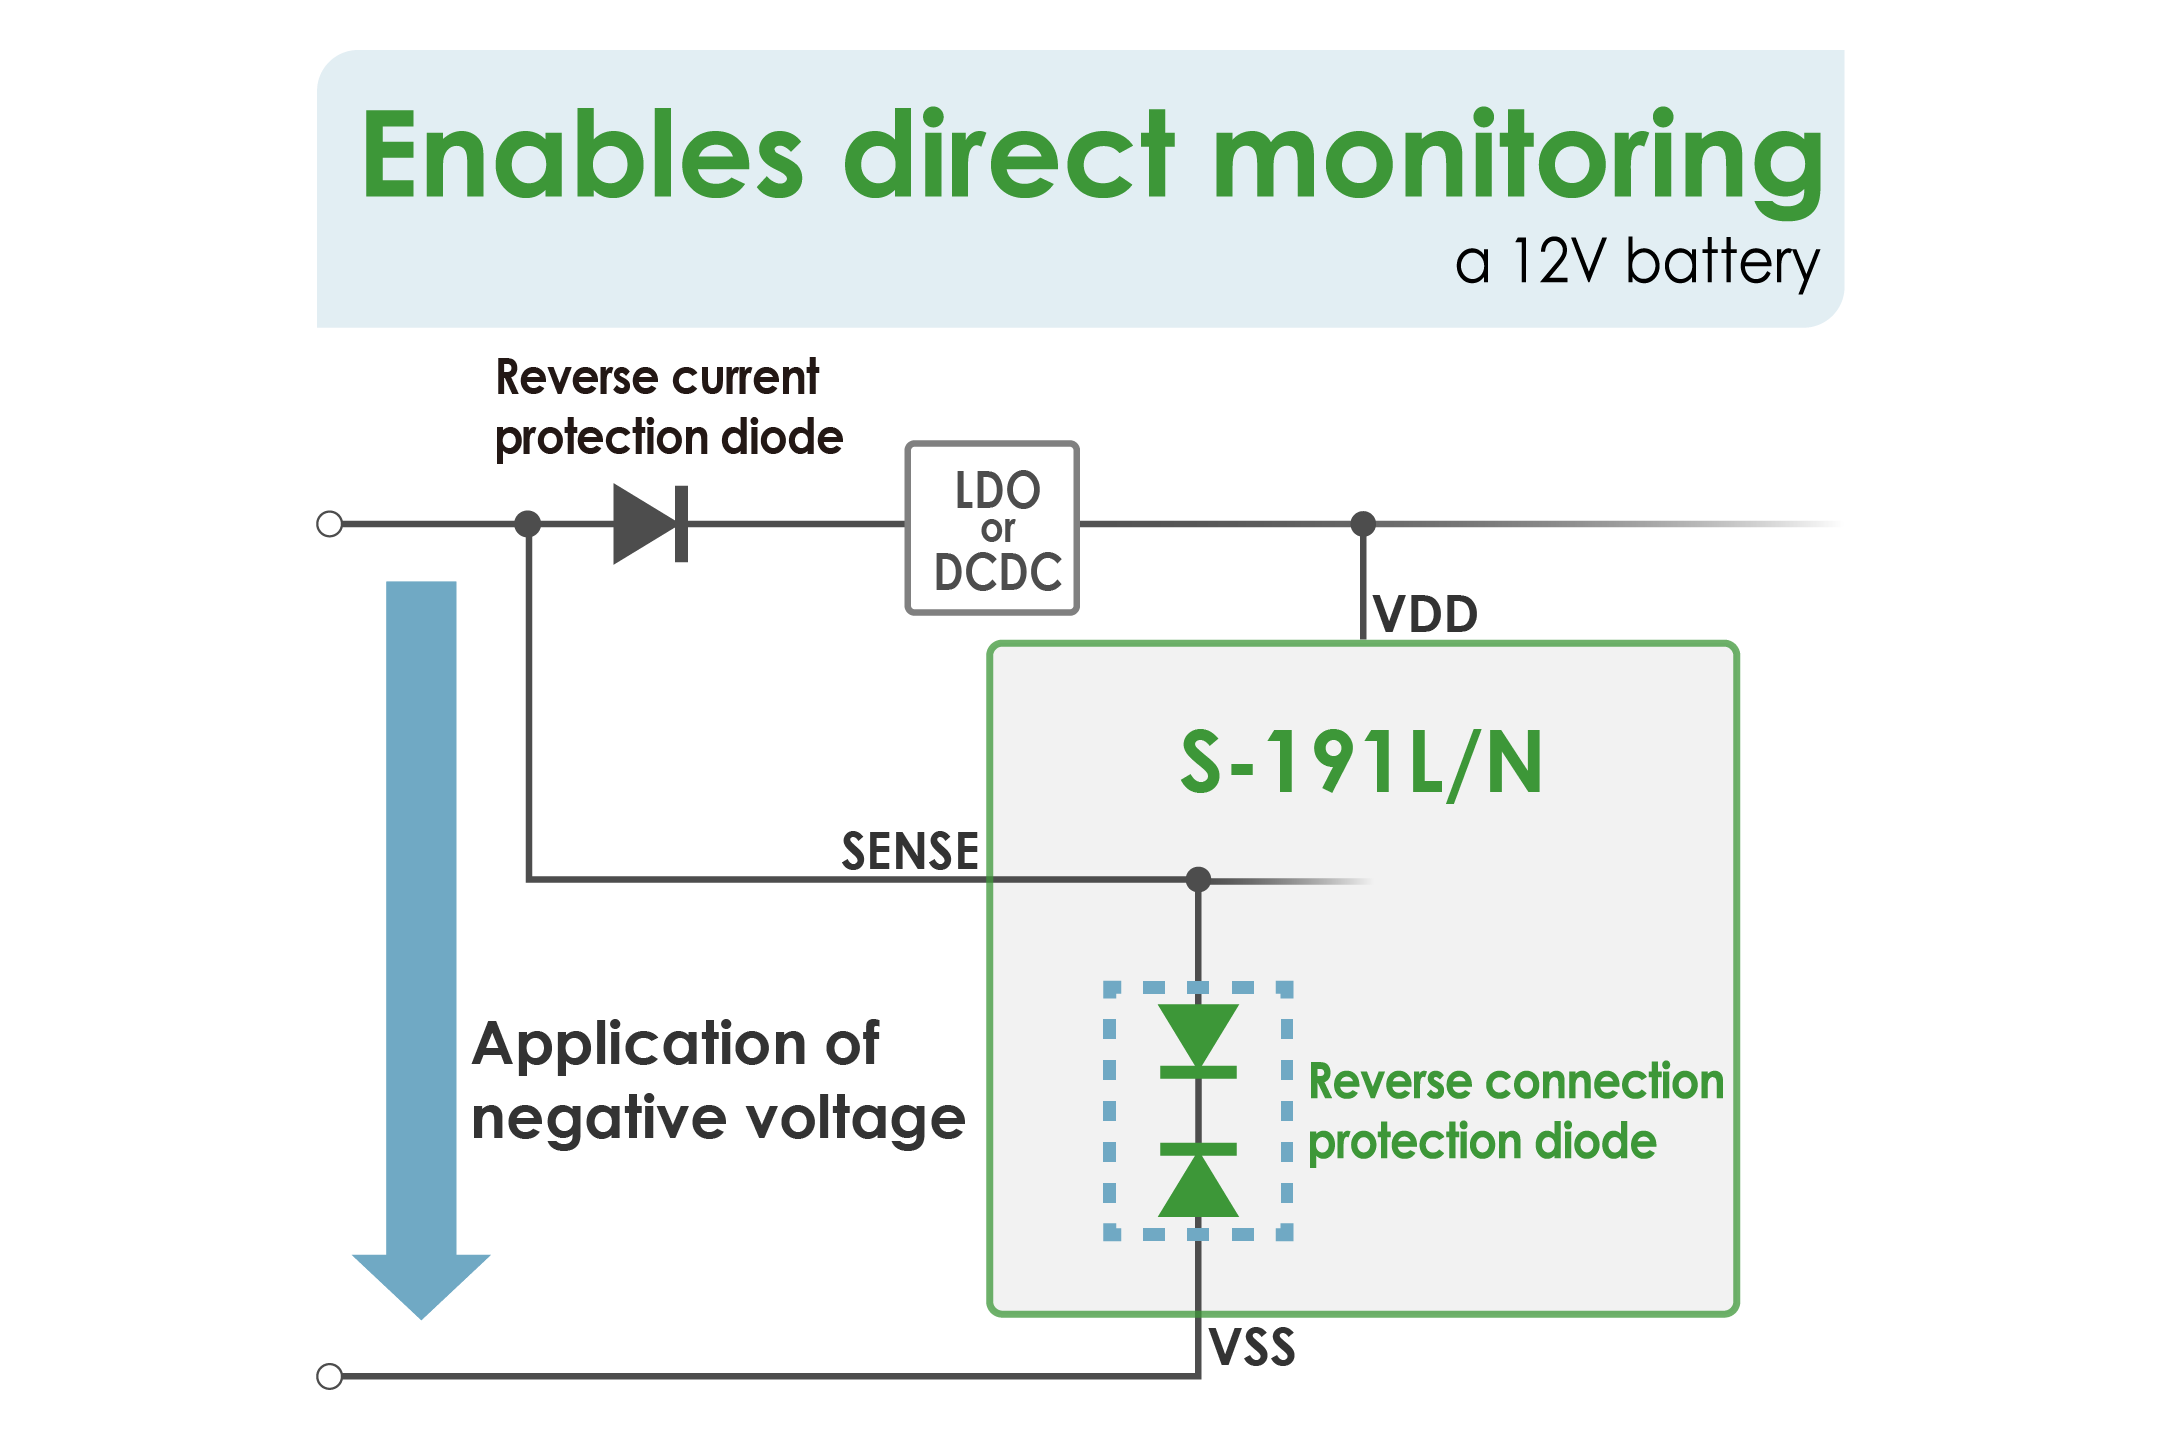 Application of negative voltage enables direct battery monitoring